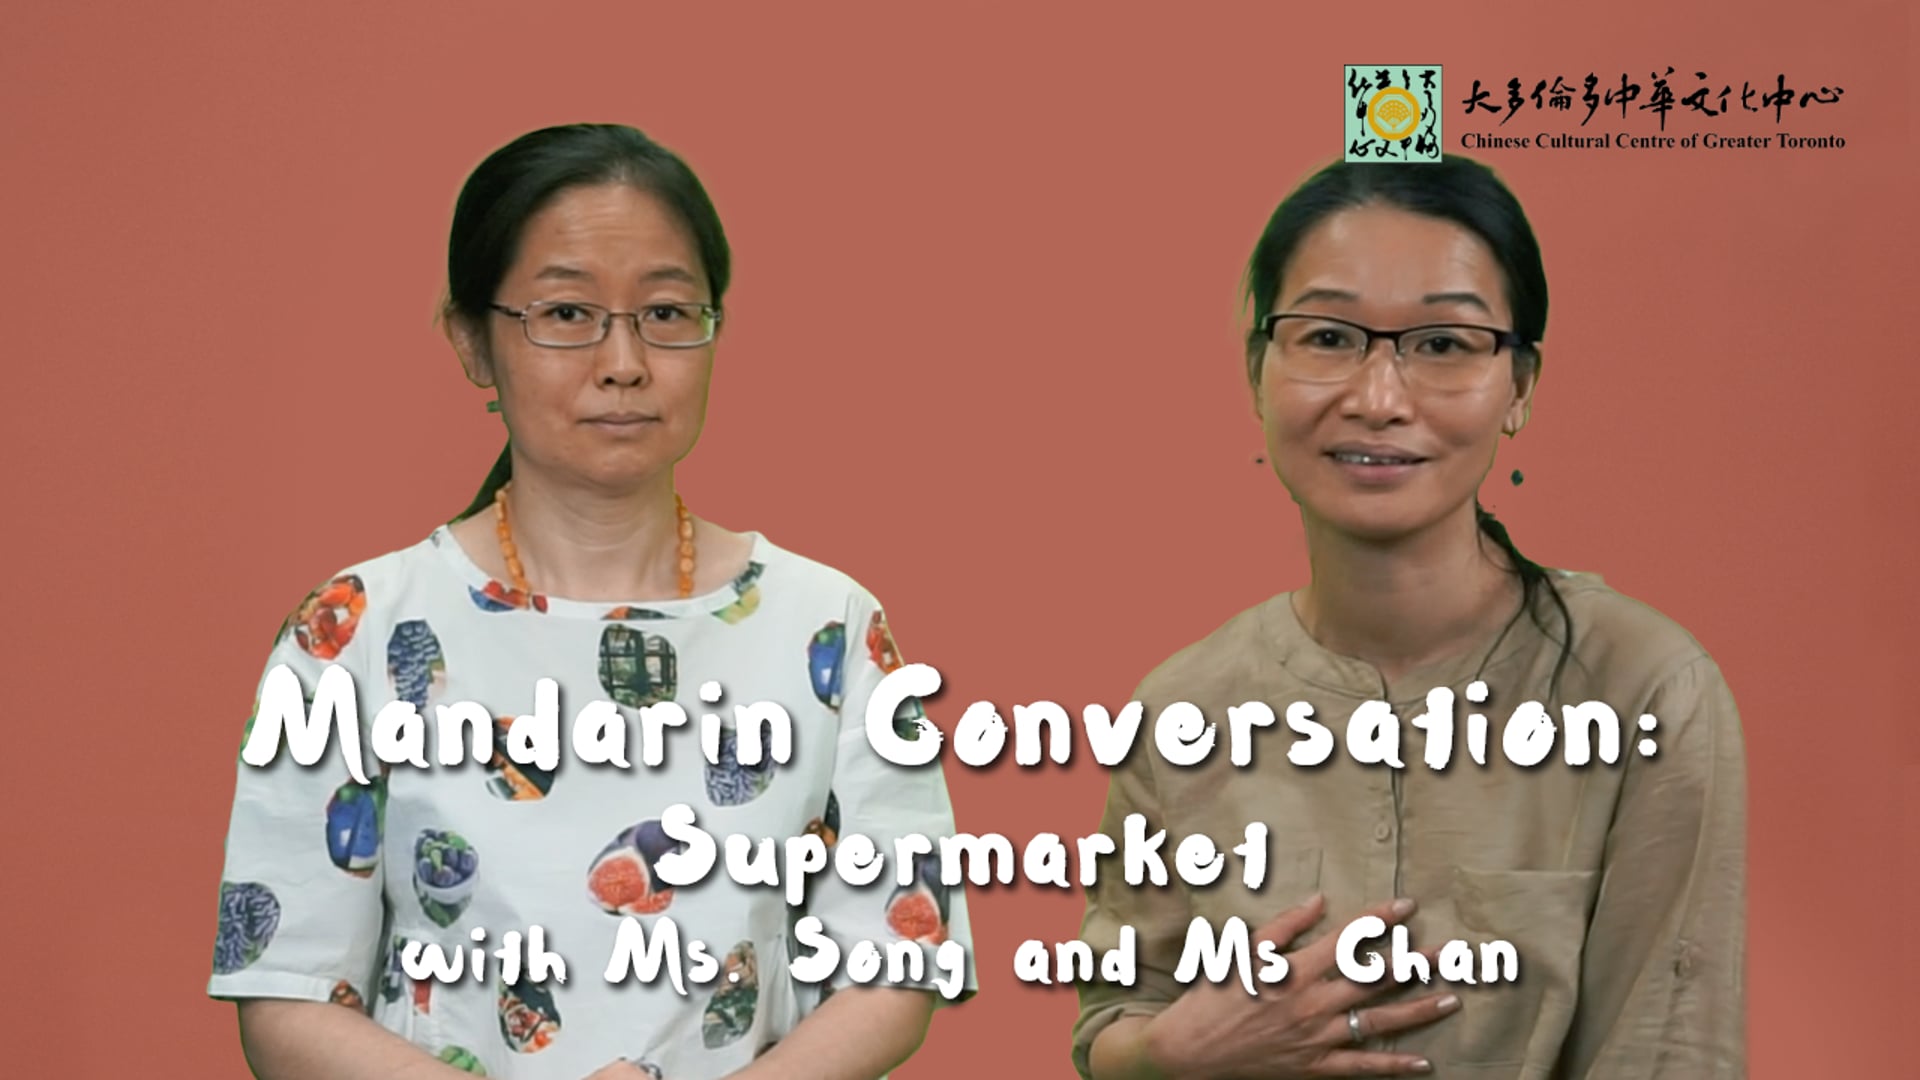 Mandarin Conversation: Supermarket - Ms. Song & Ms. Chan | CCC Connect